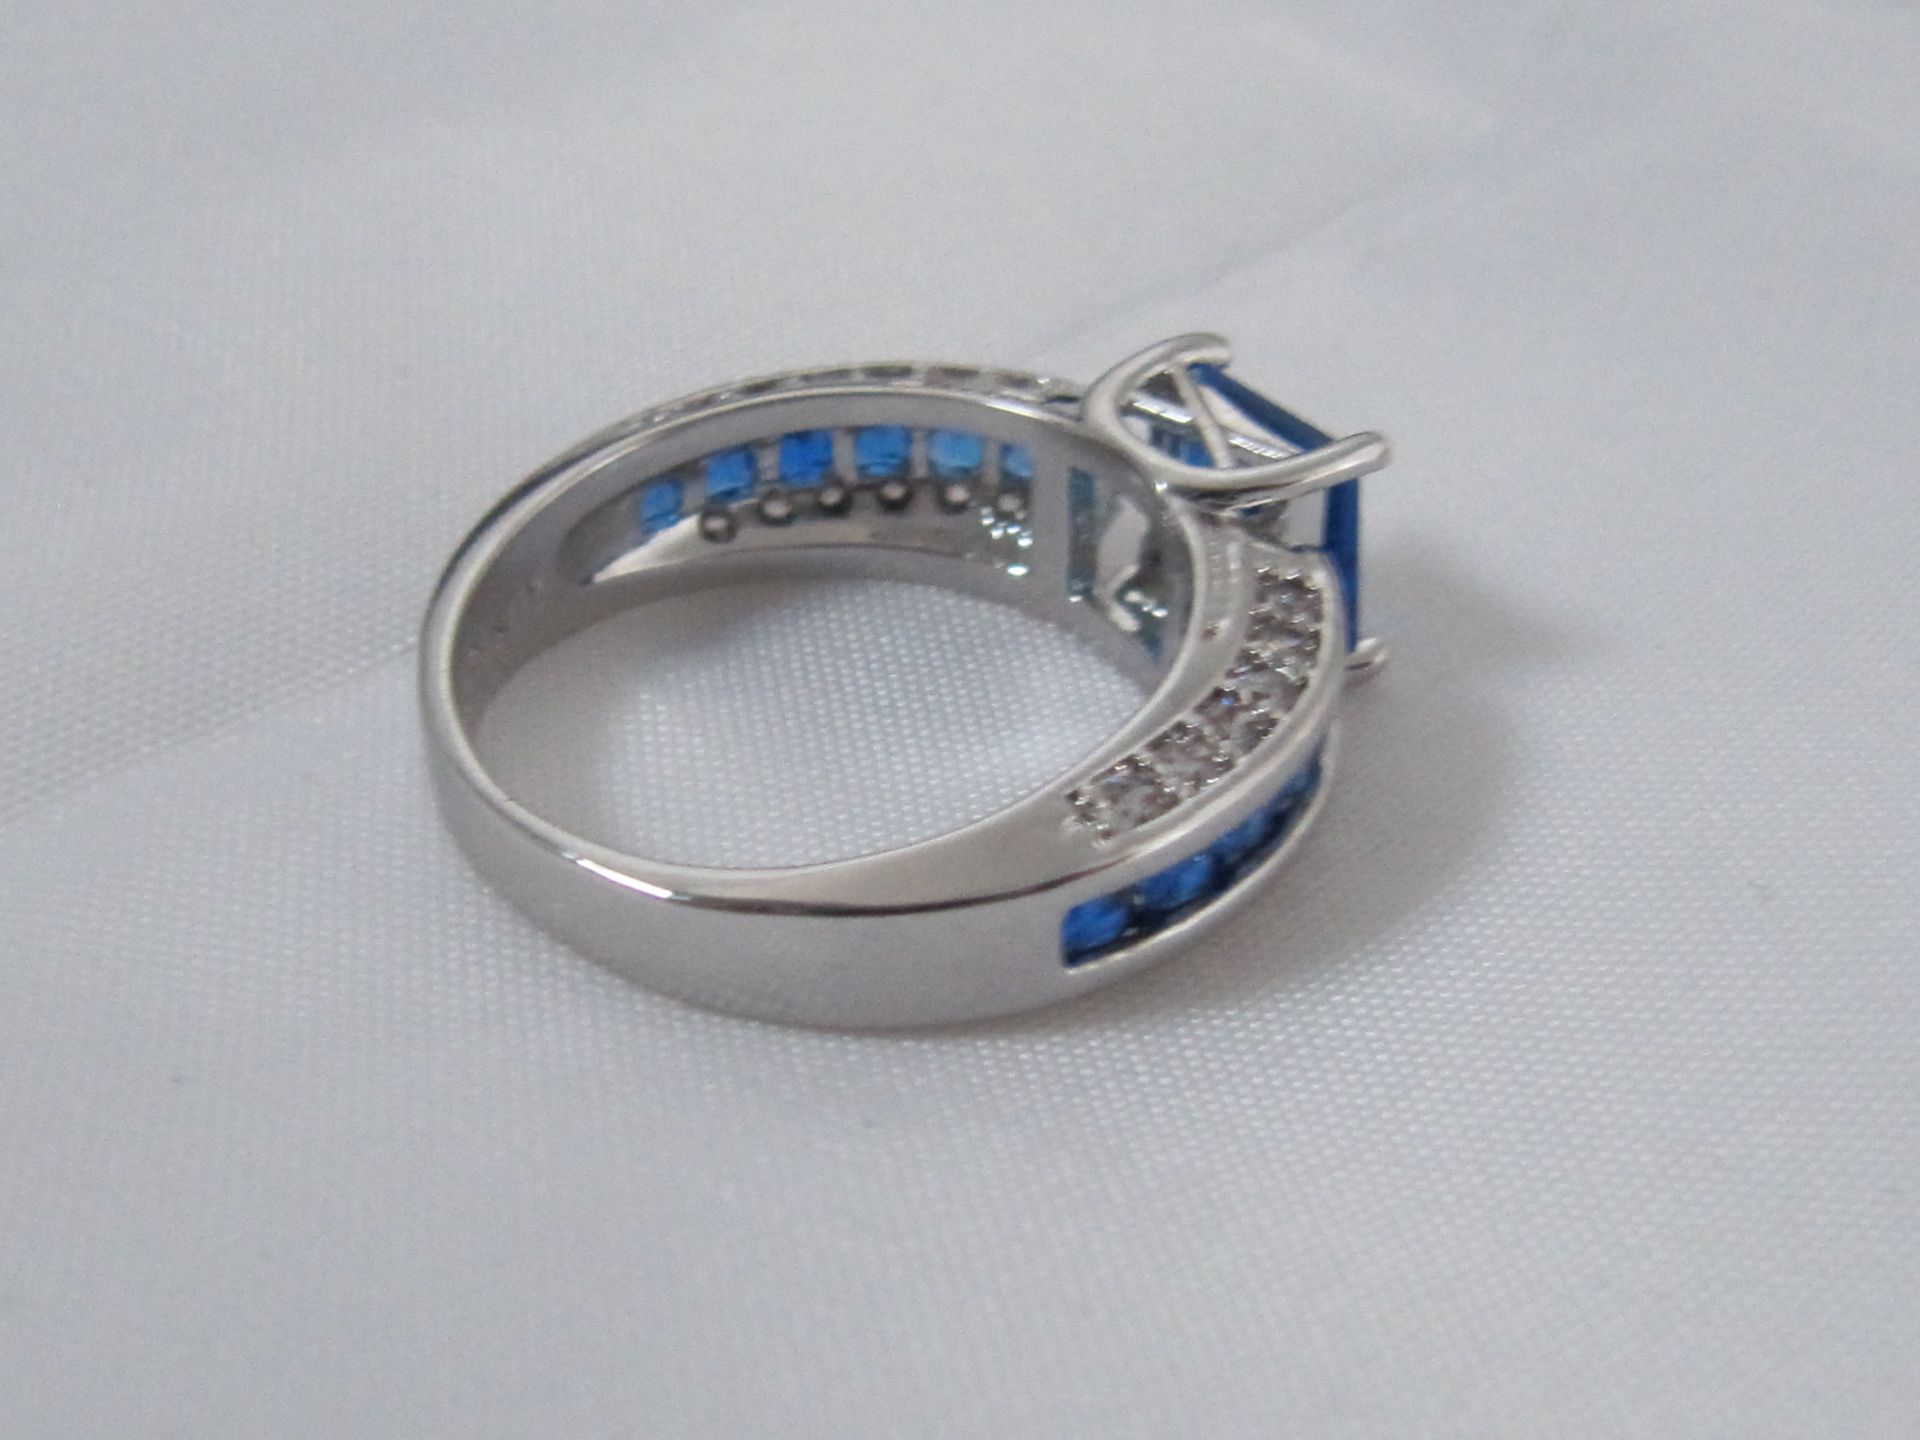 10k White Gold Filled with Blue Sapphires. Size M. - Image 4 of 5